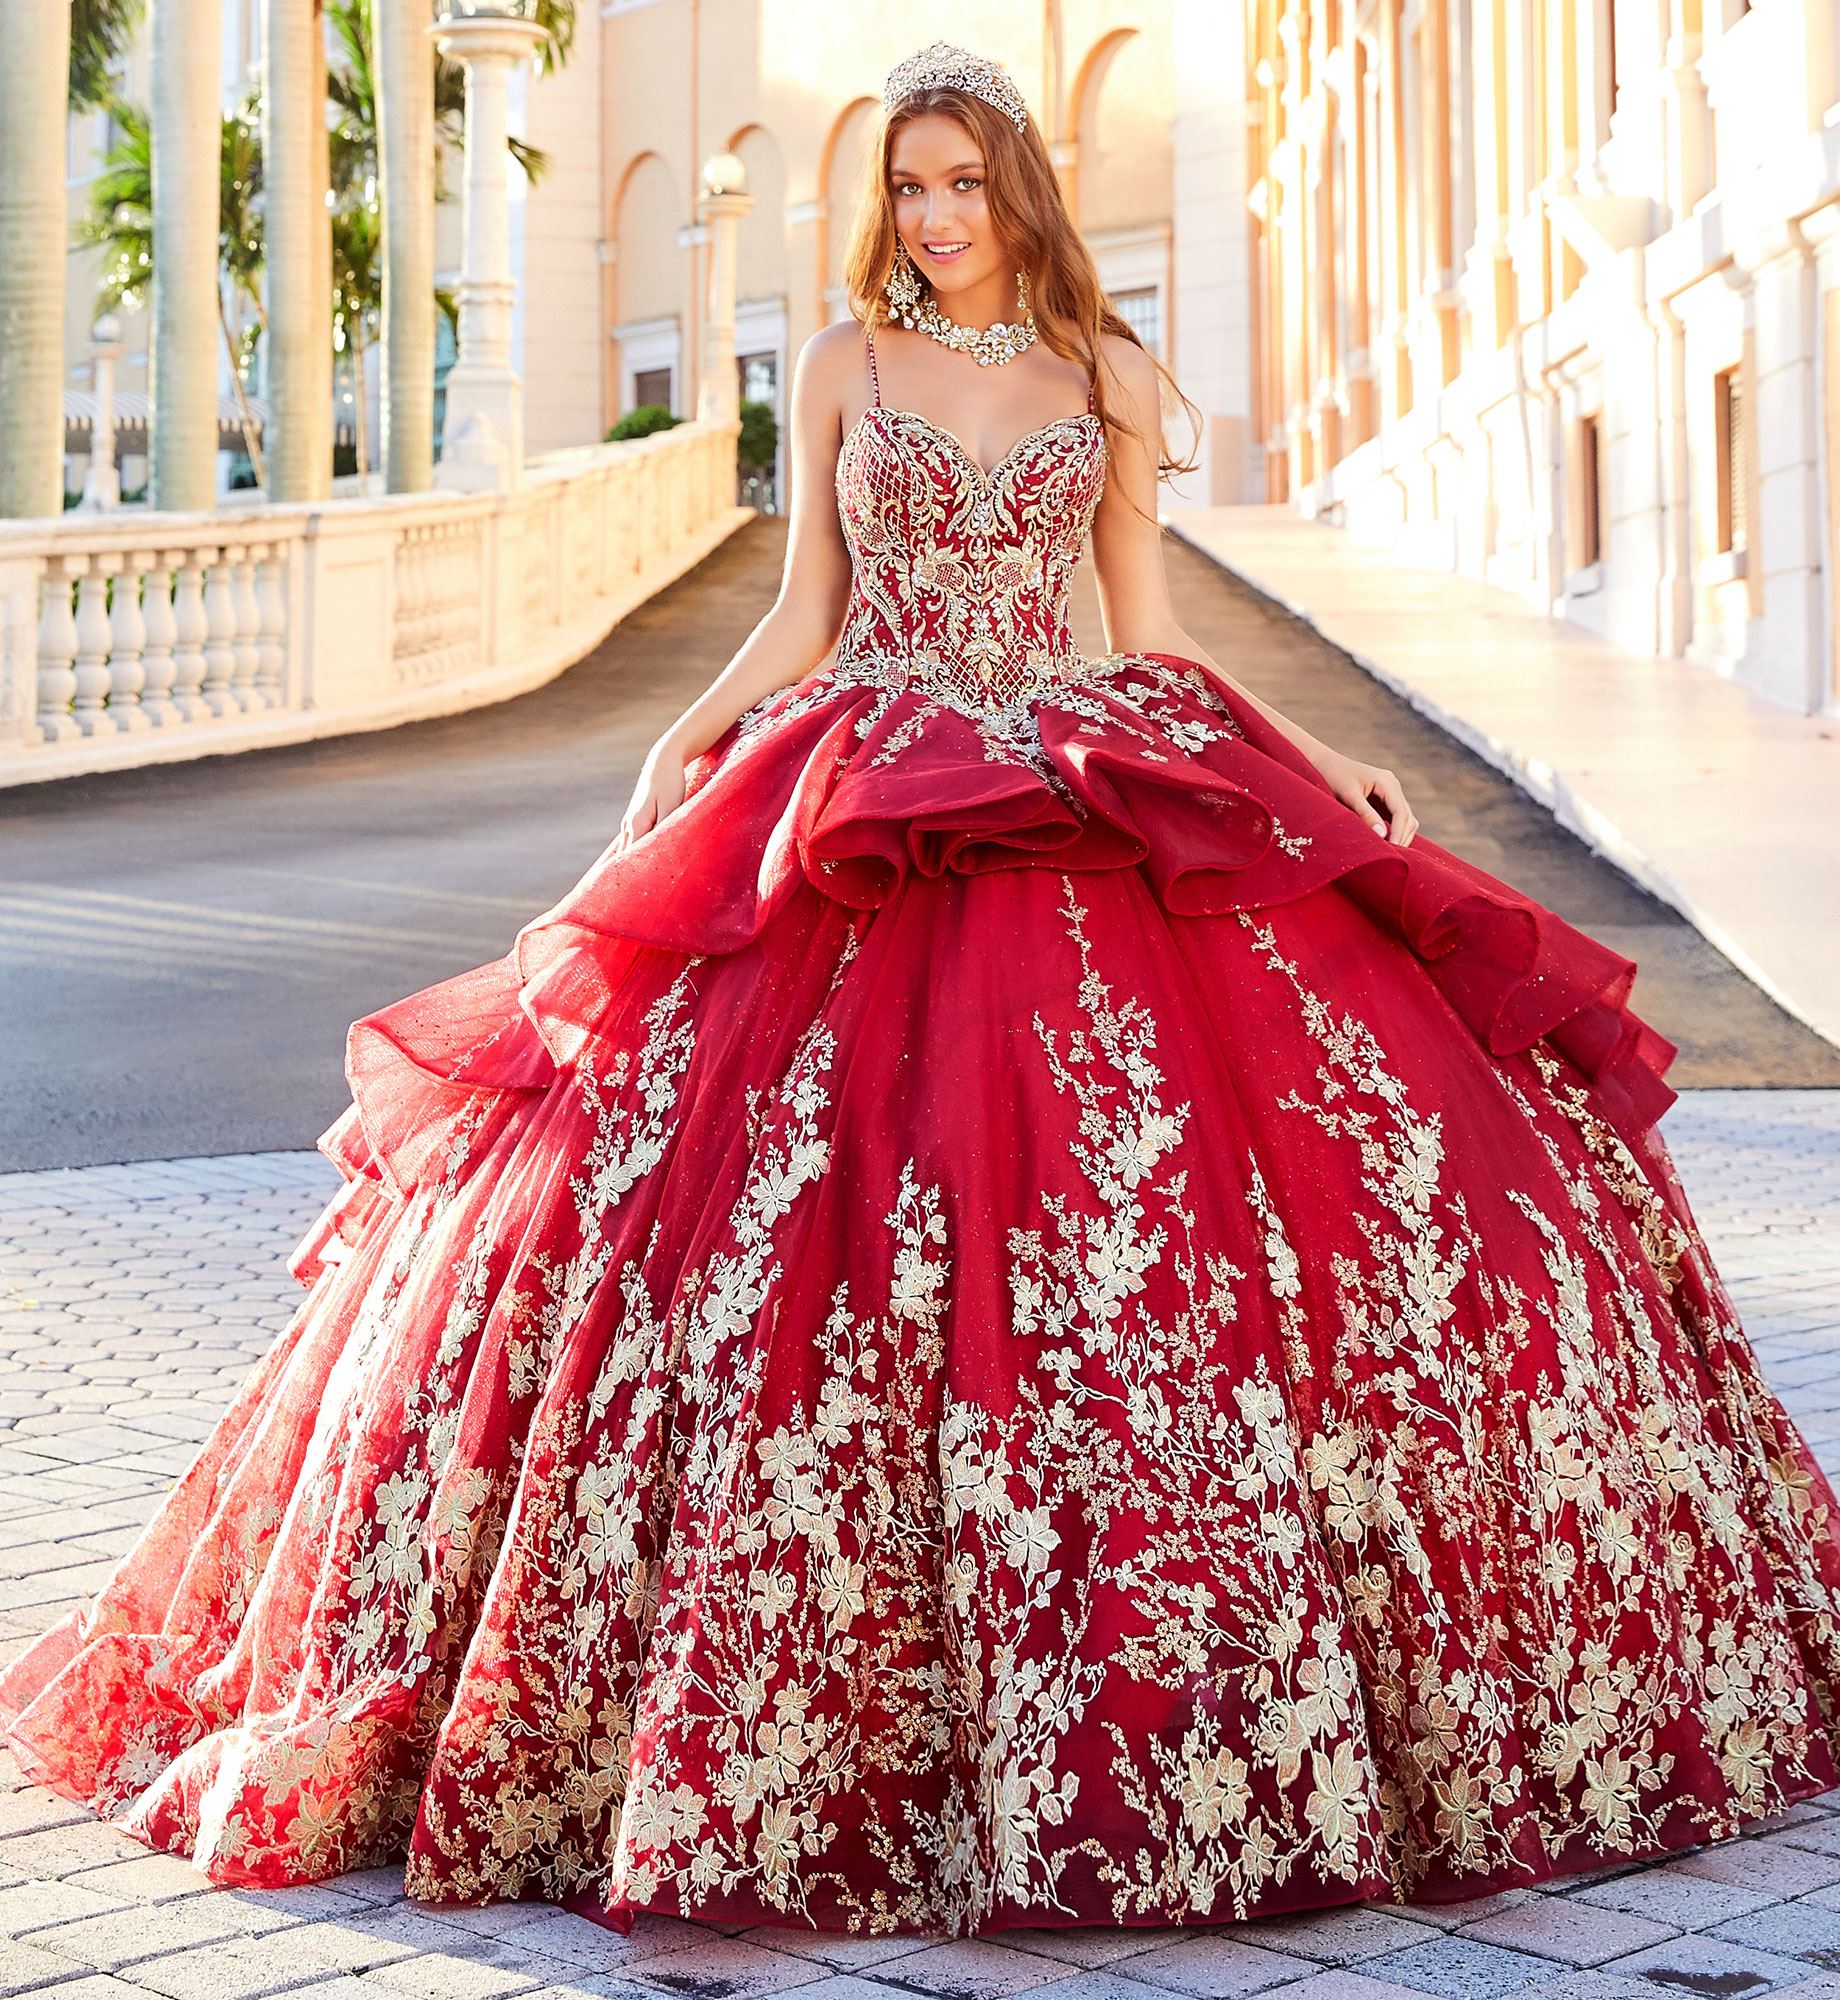 Brunette model in red and gold quinceañera dress